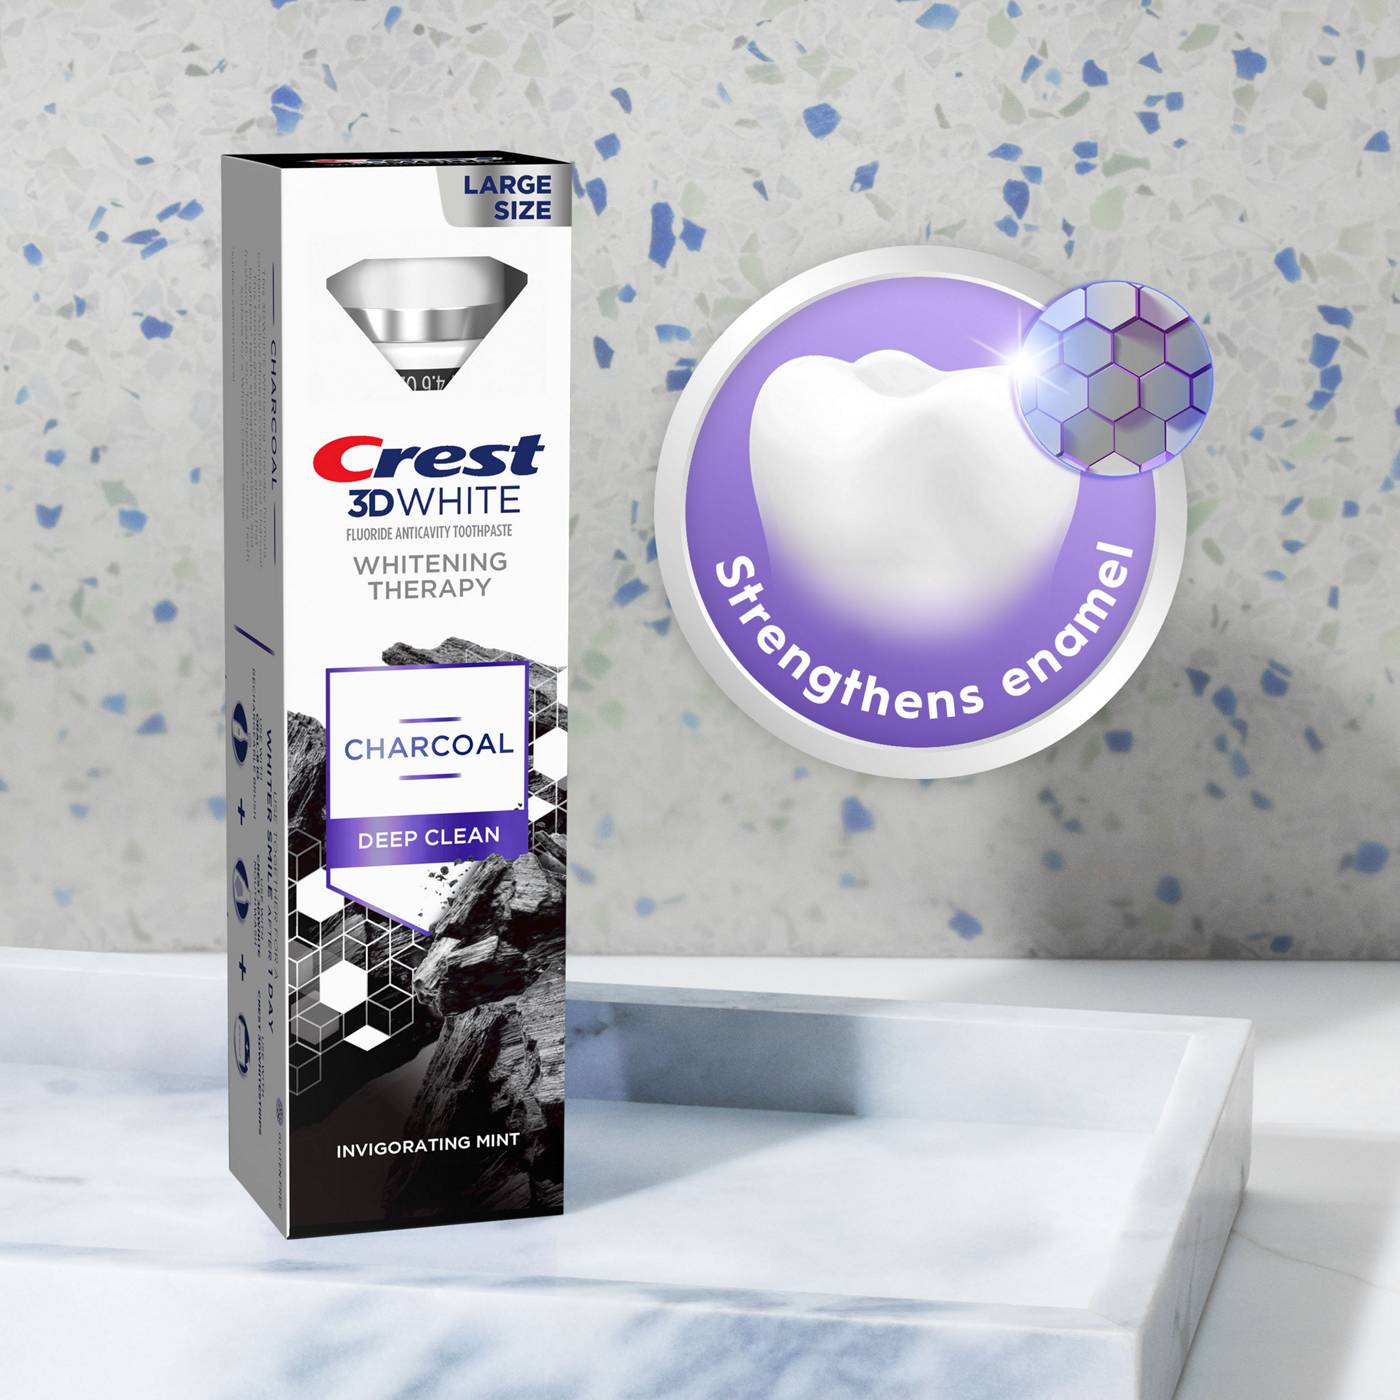 Crest 3D White Whitening Therapy Charcoal Toothpaste - Deep Clean; image 3 of 8